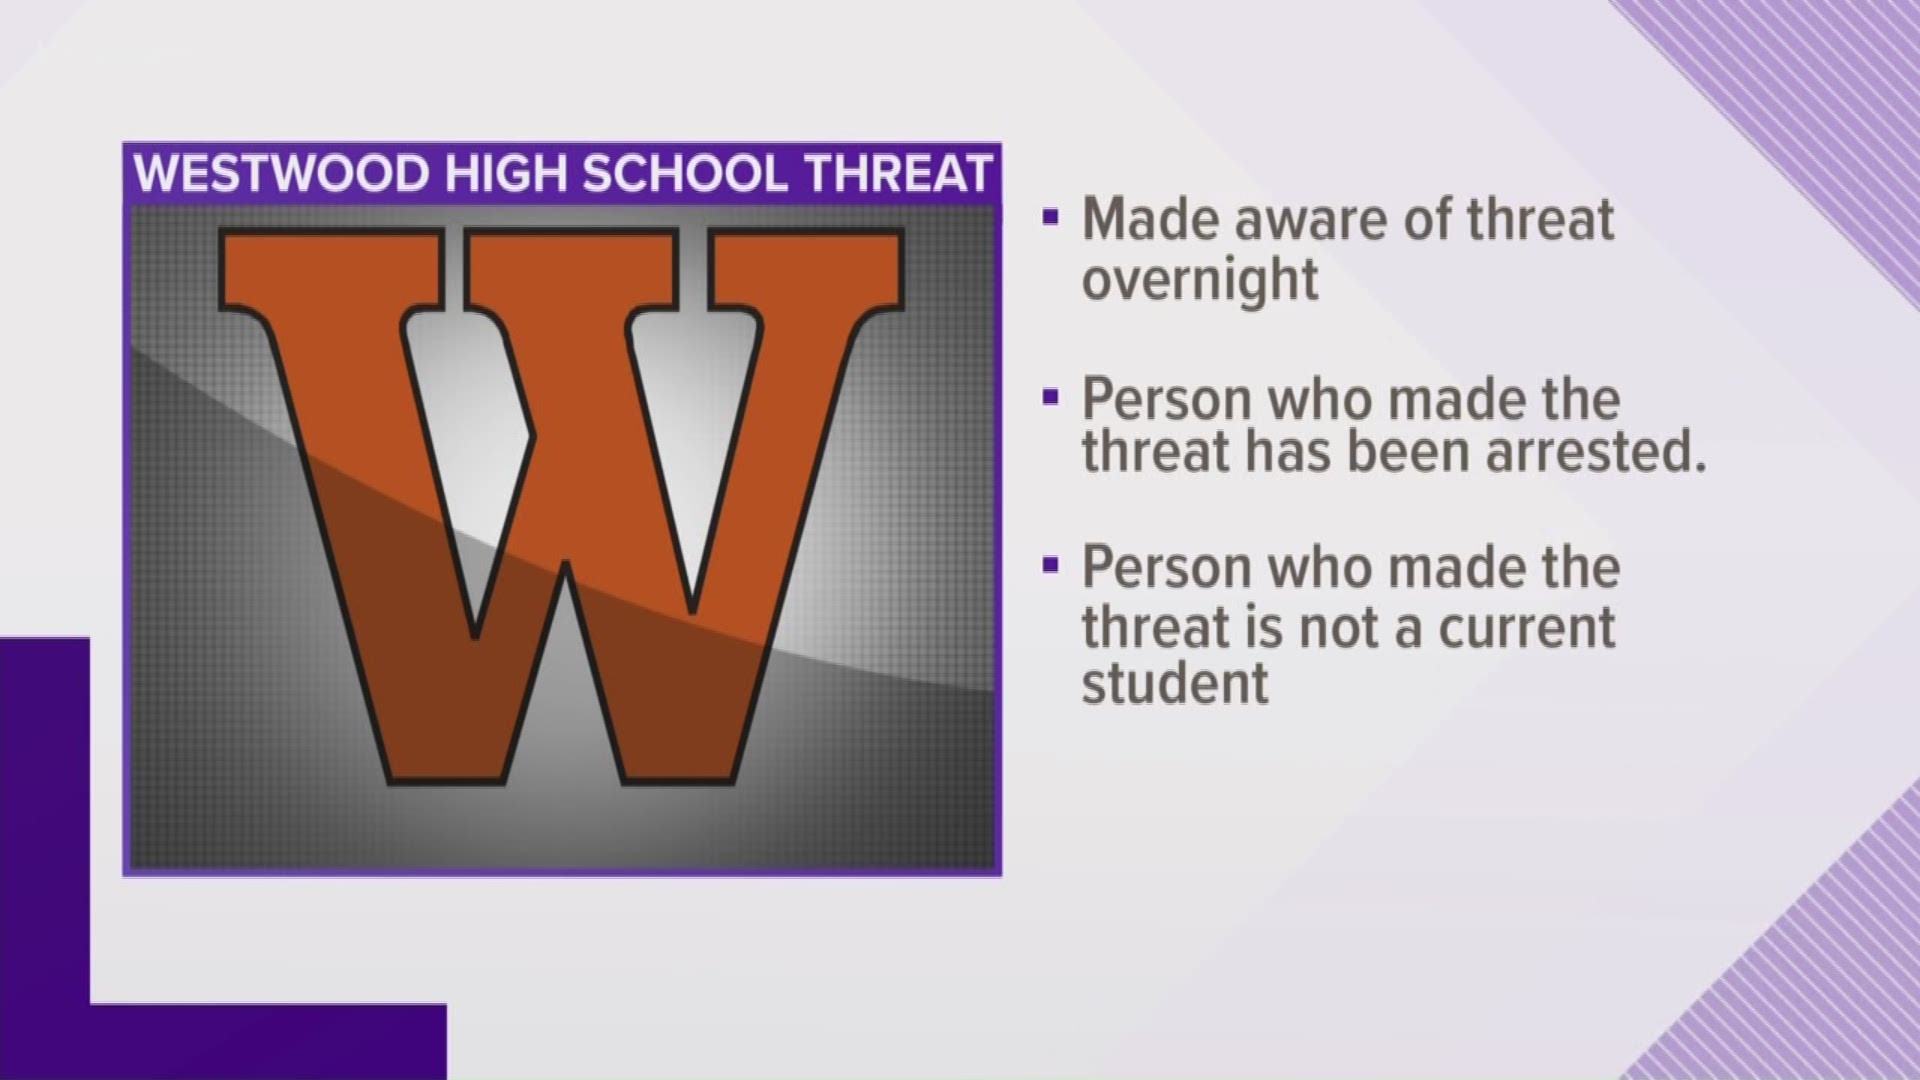 Round Rock ISD is addressing a threat made against Westwood High School.